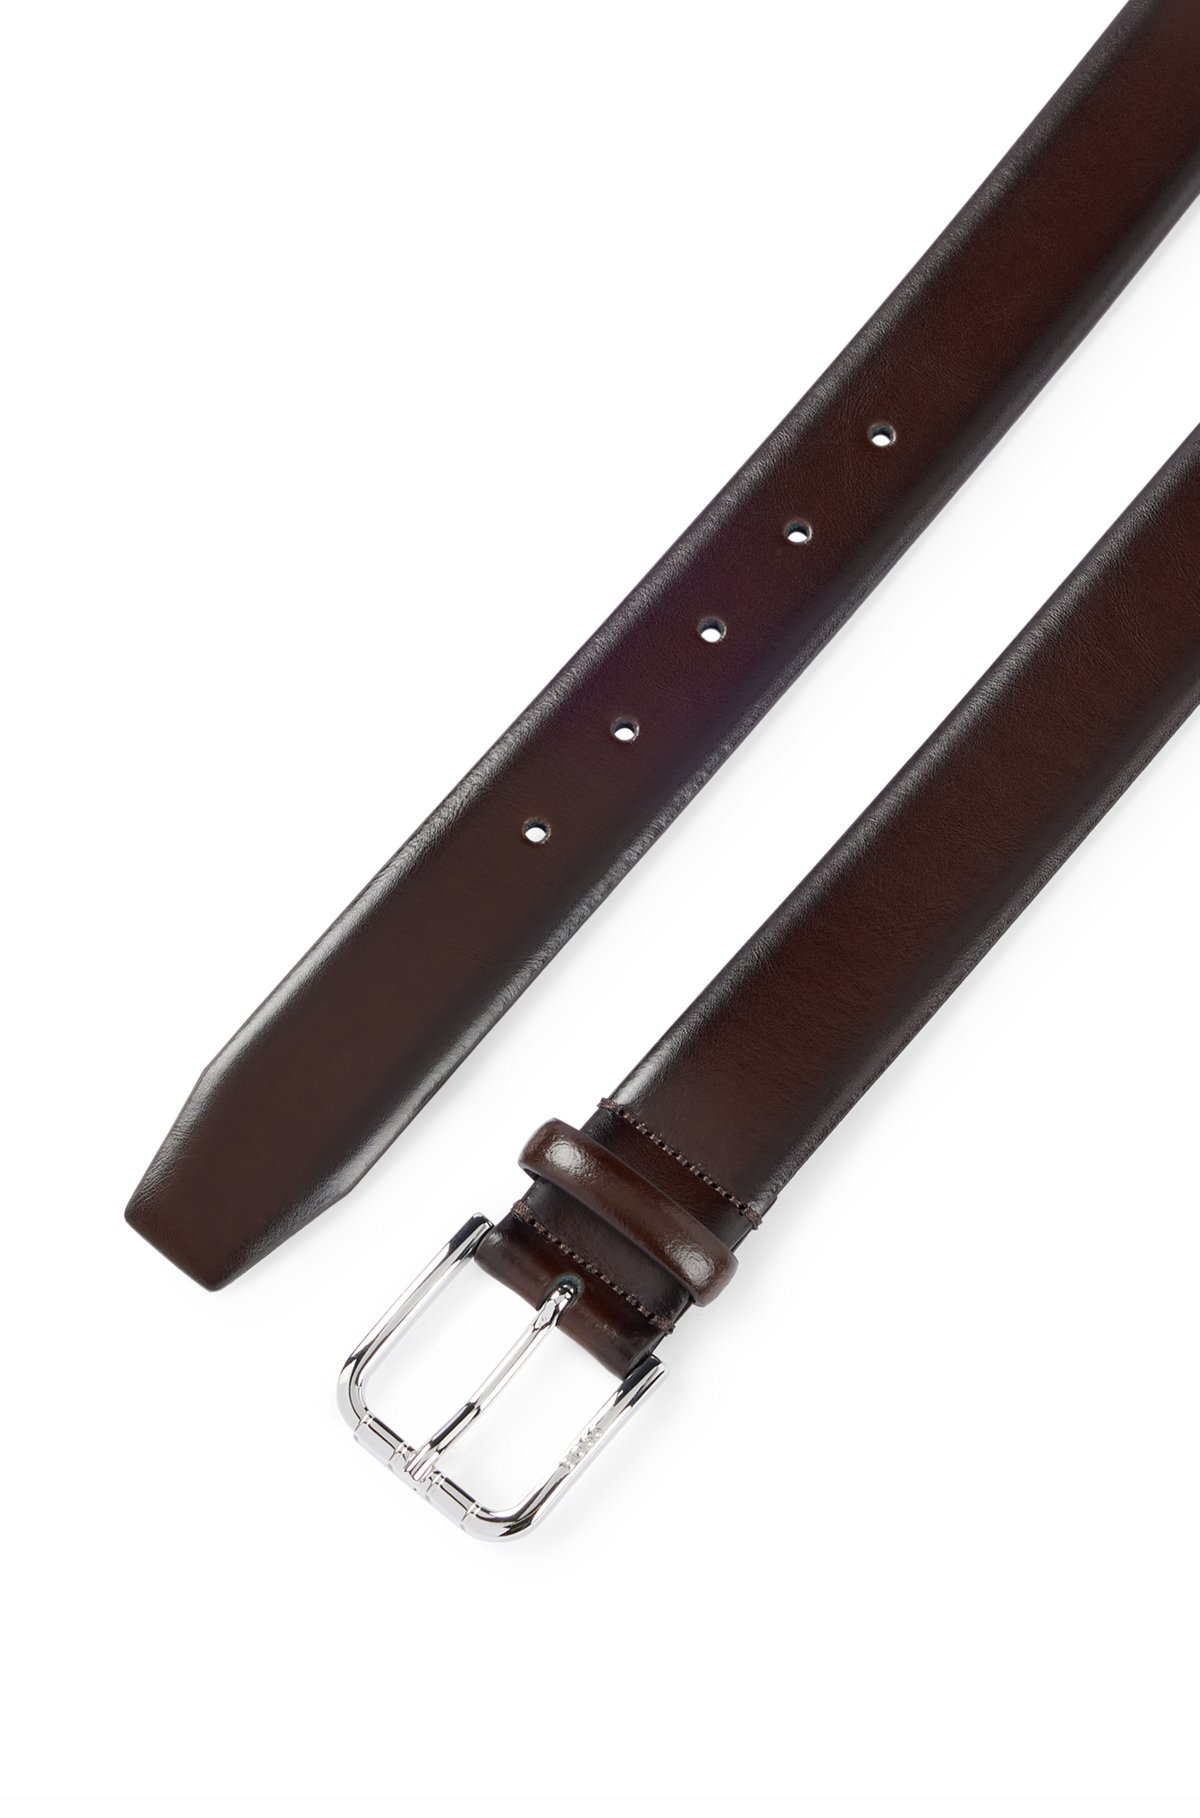 BOSS - Italian-made belt in polished leather with branded buckle